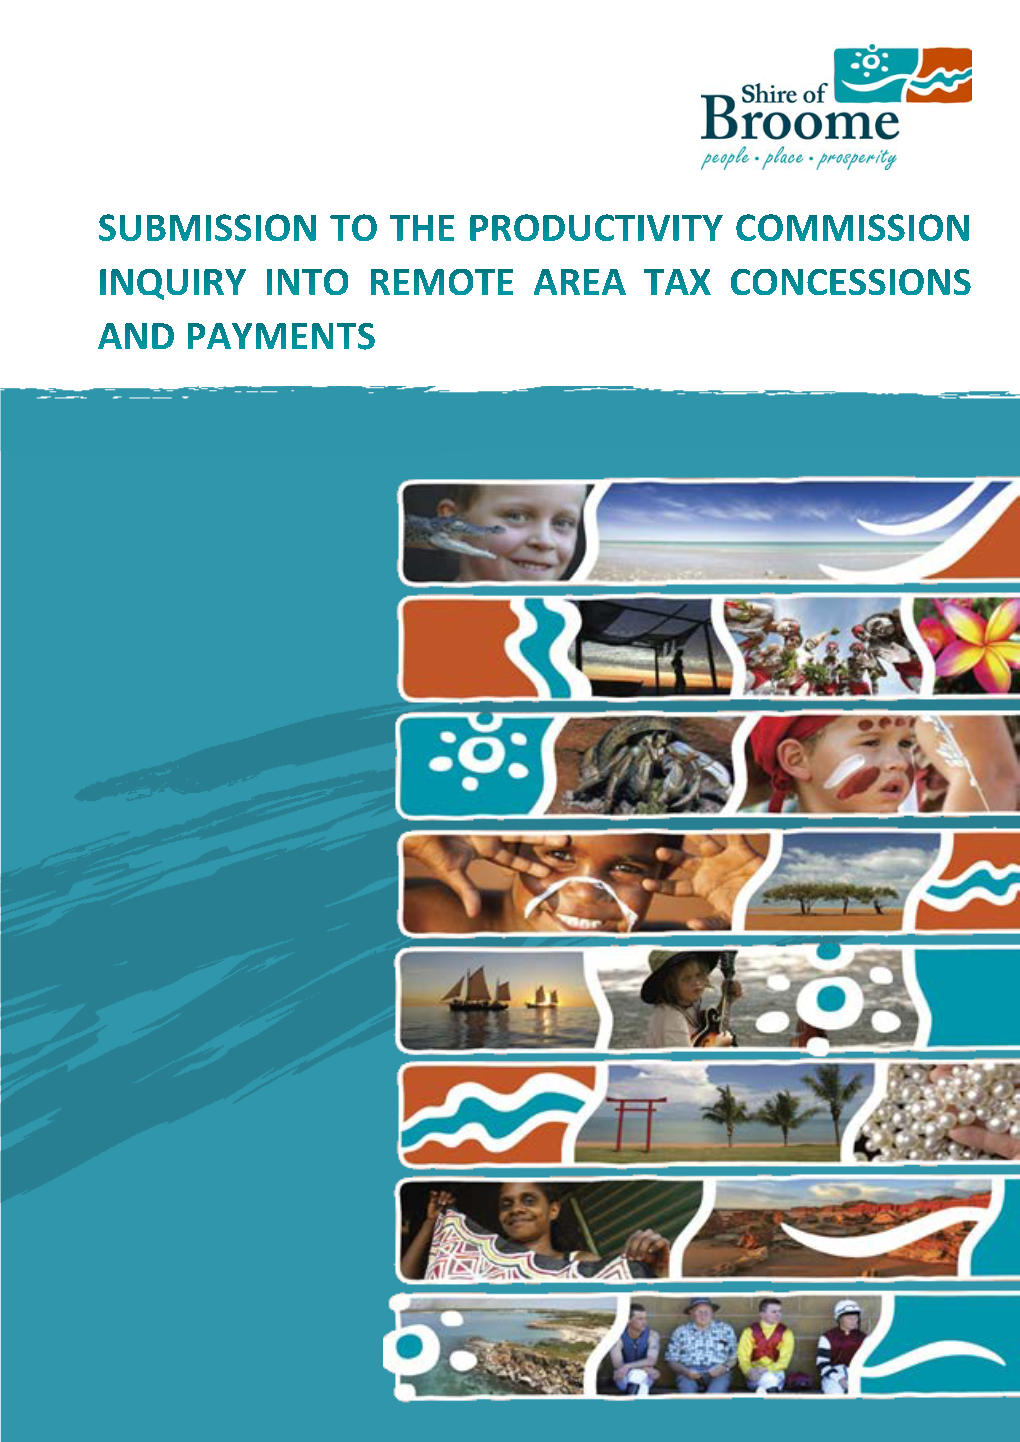 Shire of Broome Submission – Productivity Commission – Remote Area Tax Concessions and Payments Oct 2019 2